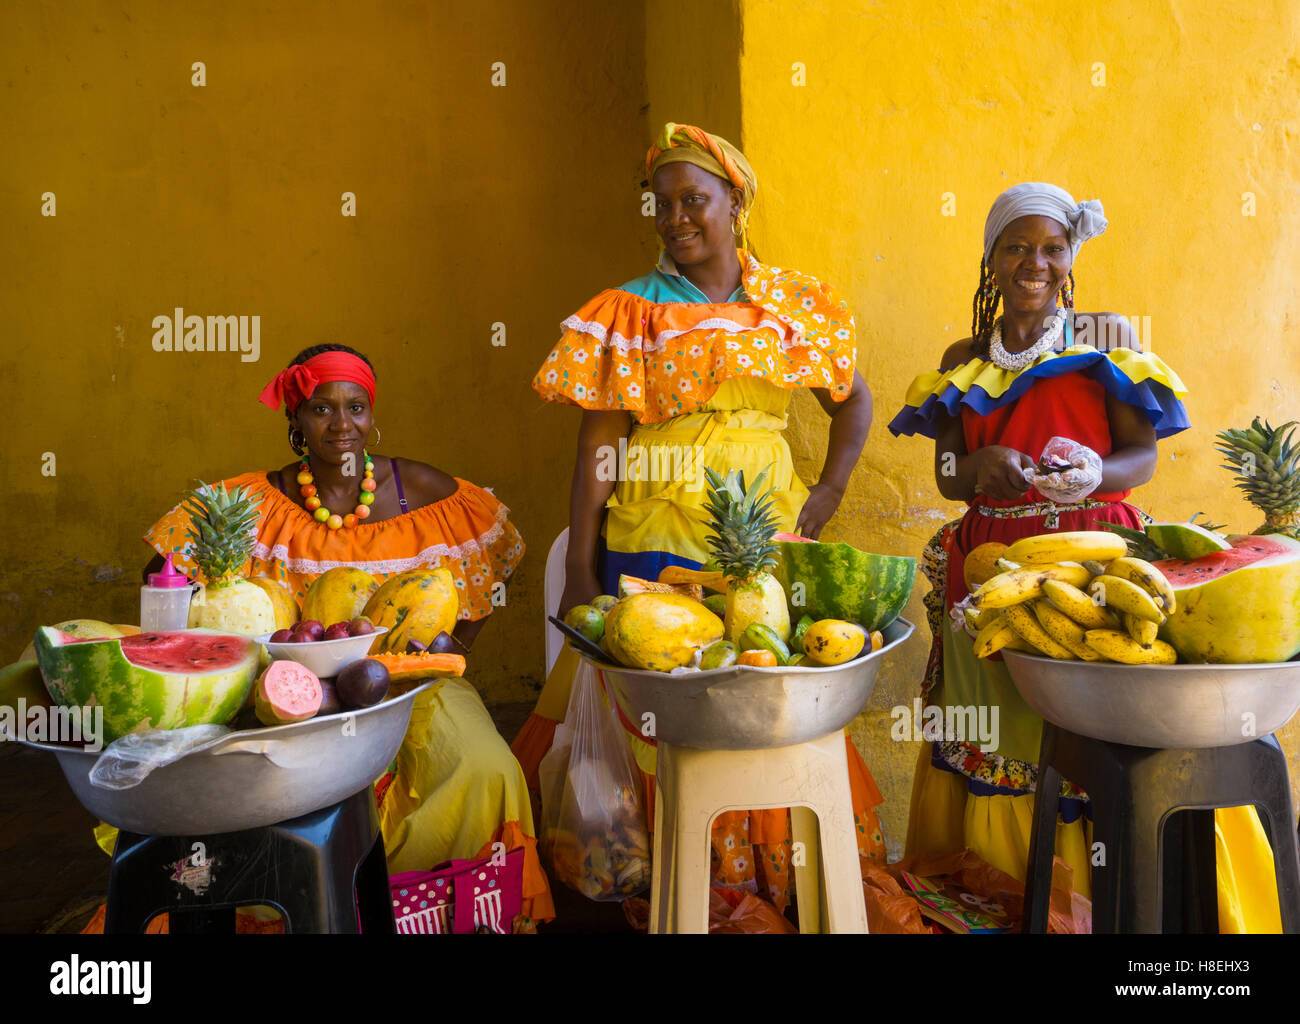 Women in traditional costume selling fruit in Cartagena, Colombia, South America Stock Photo